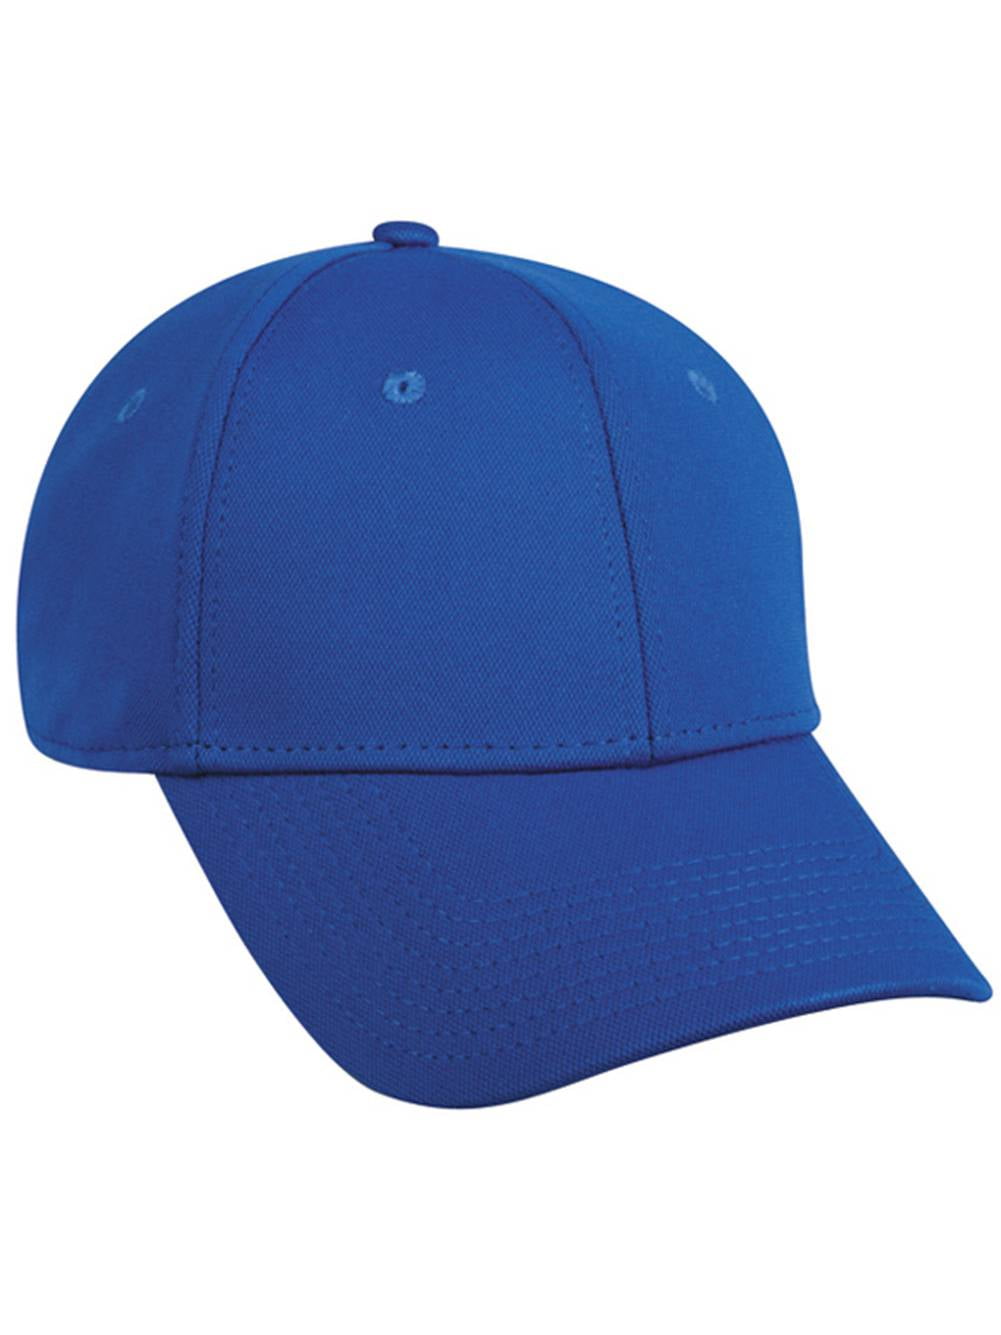 Fit All Flex Fitted Hat Large- X Large, Royal Blue